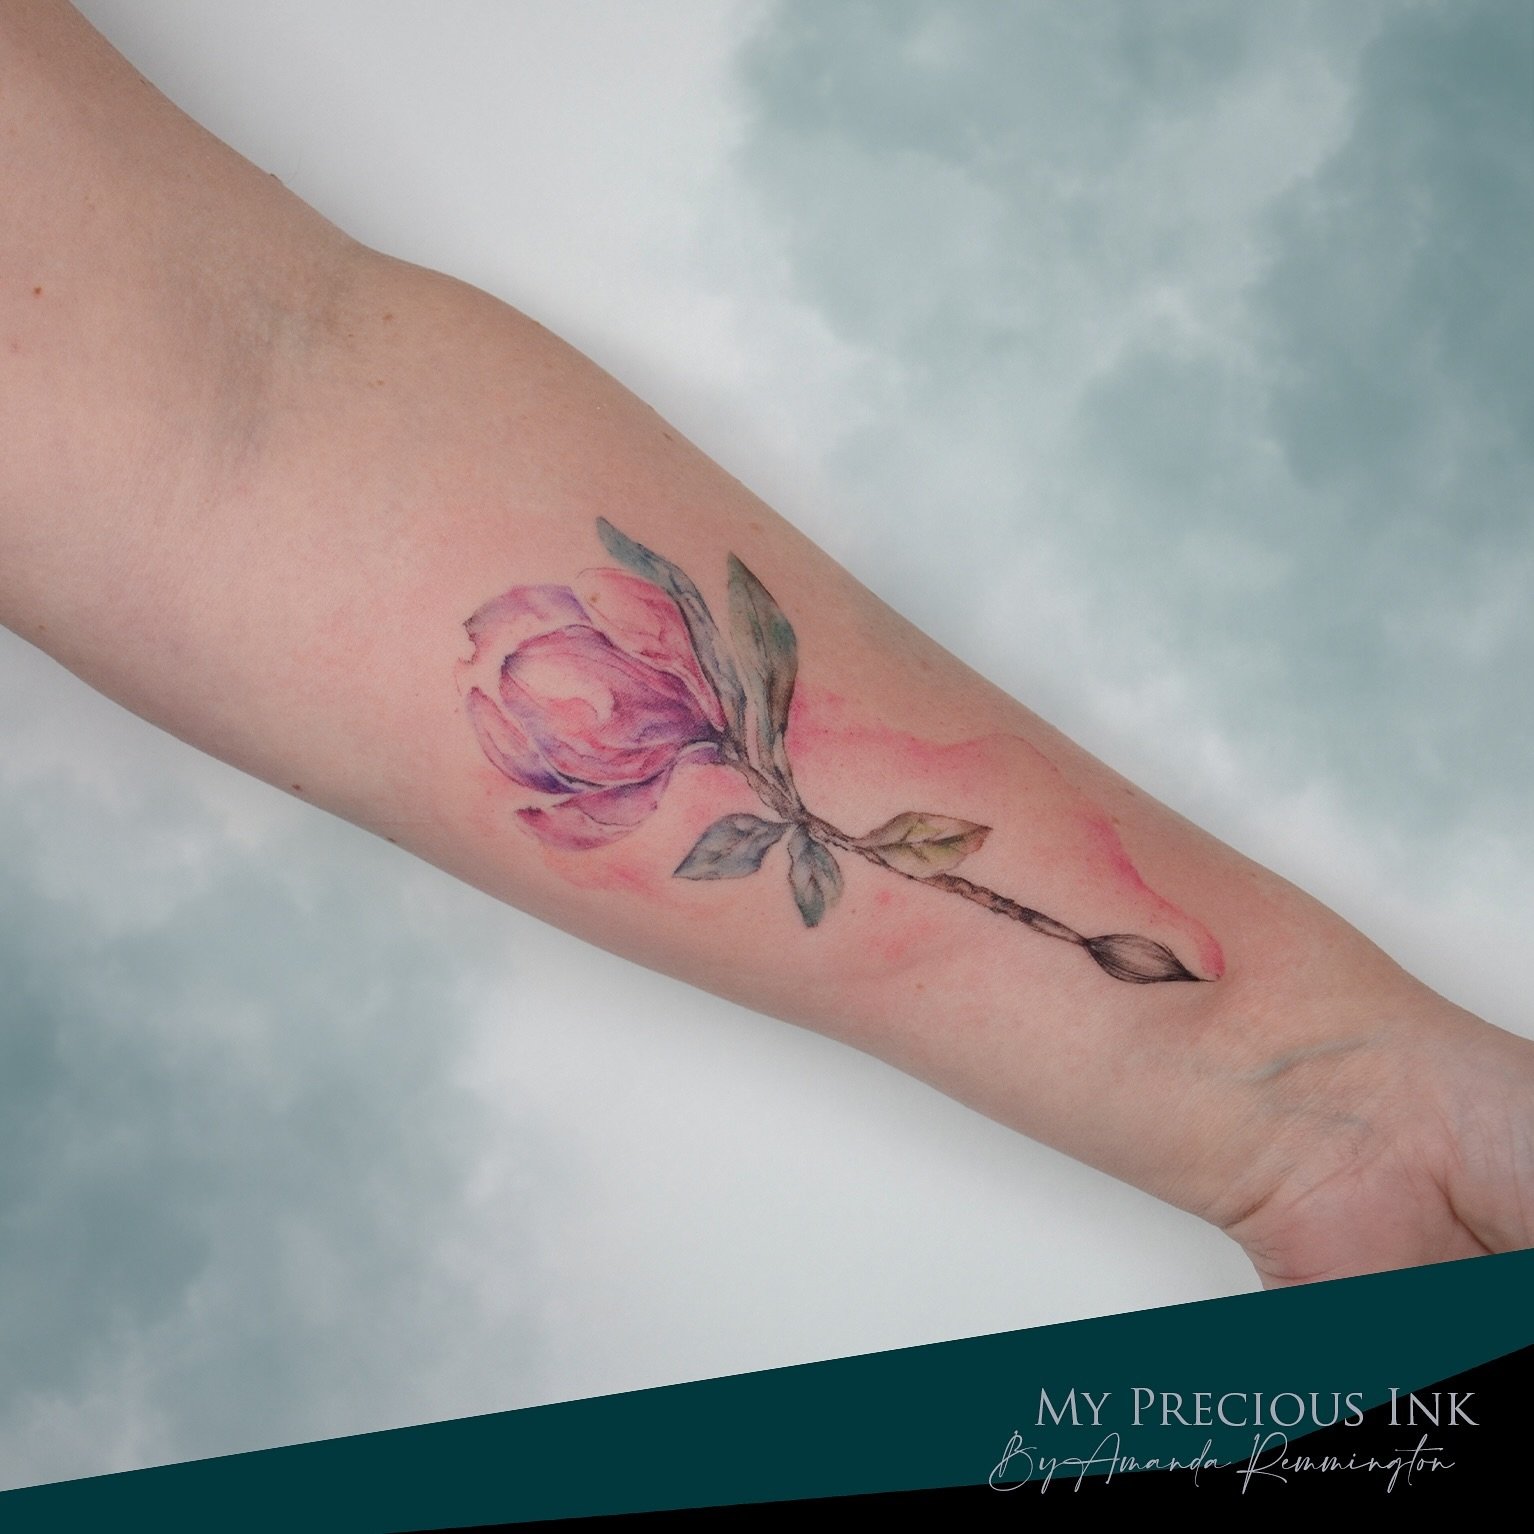 2 different things combined in 1 tattoo! 

#tattoolifecommunity #watercolortattoos  #watercolortattoostyle #watercolortattooartist #abstracttattoo #tattoostagrams #dutchtattooartist #colortattooartist  #abstracttattooart #abstracttattoos #colorfullta